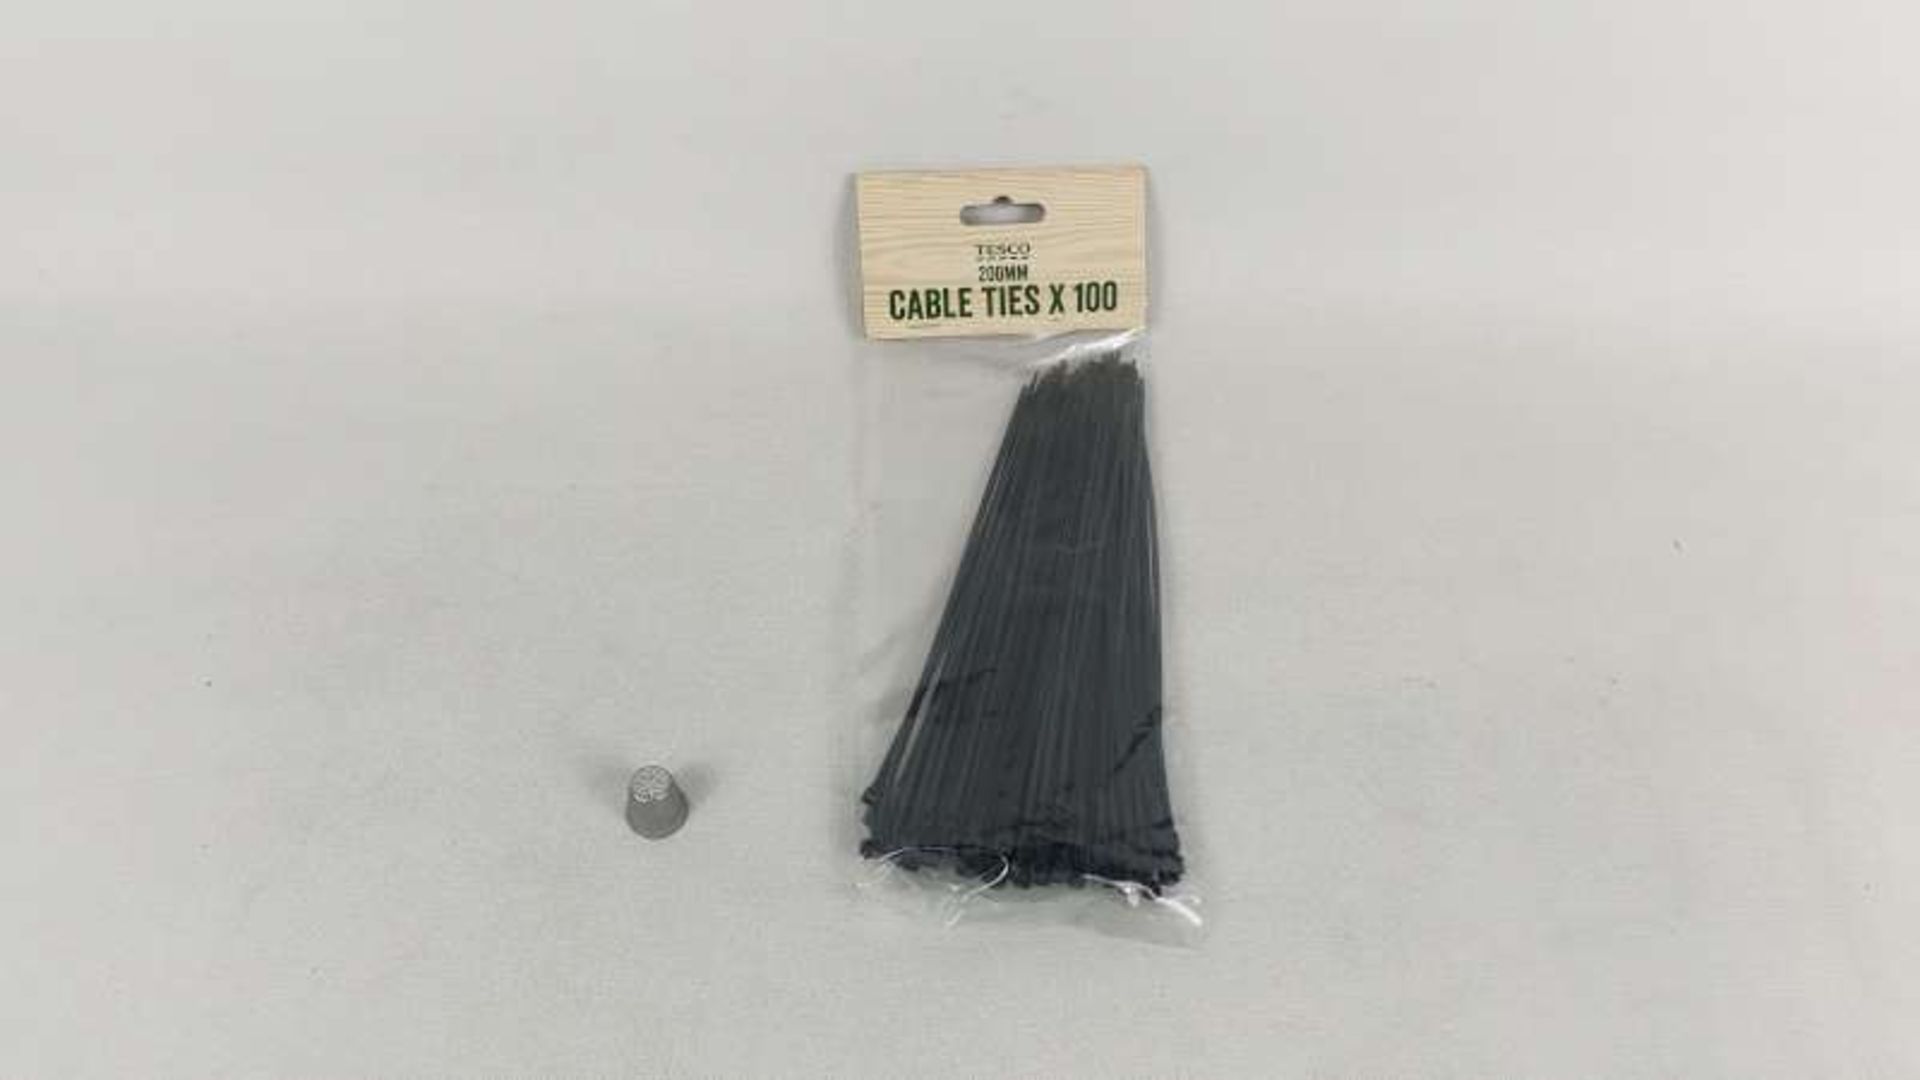 96 X PACKS OF 100 CABLE TIES SIZE 200 MM IN 1 BOX